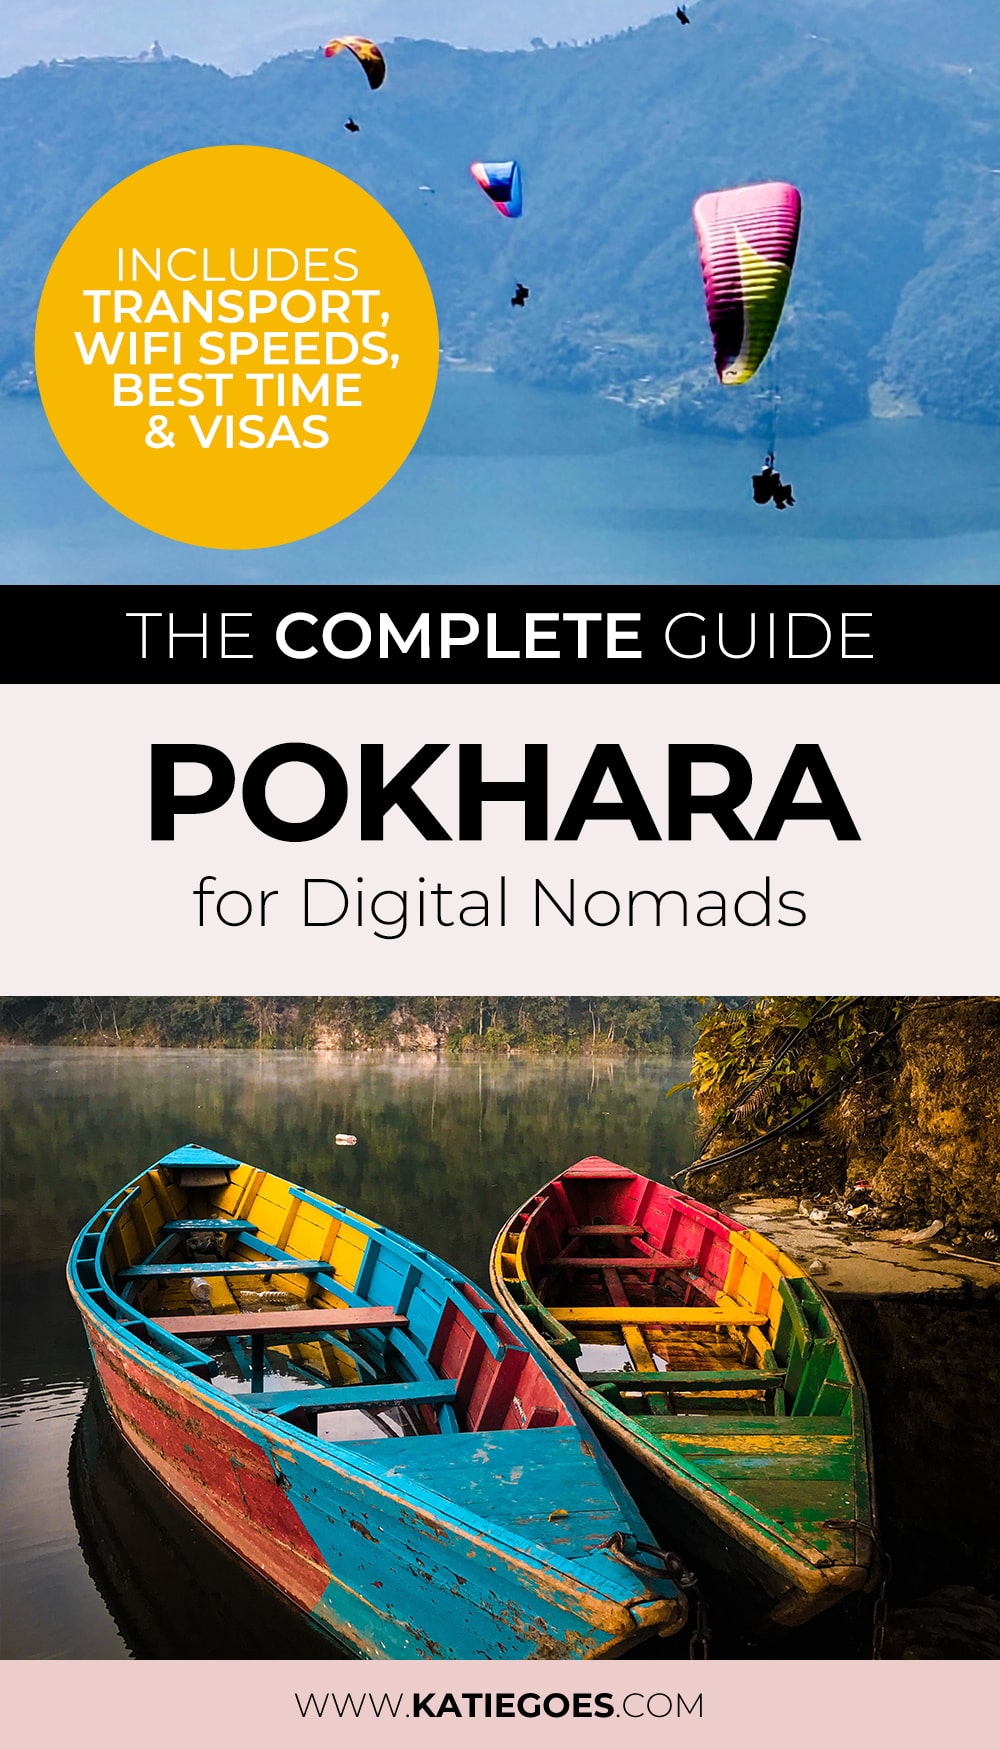 The Complete Guide to Pokhara for Digital Nomads